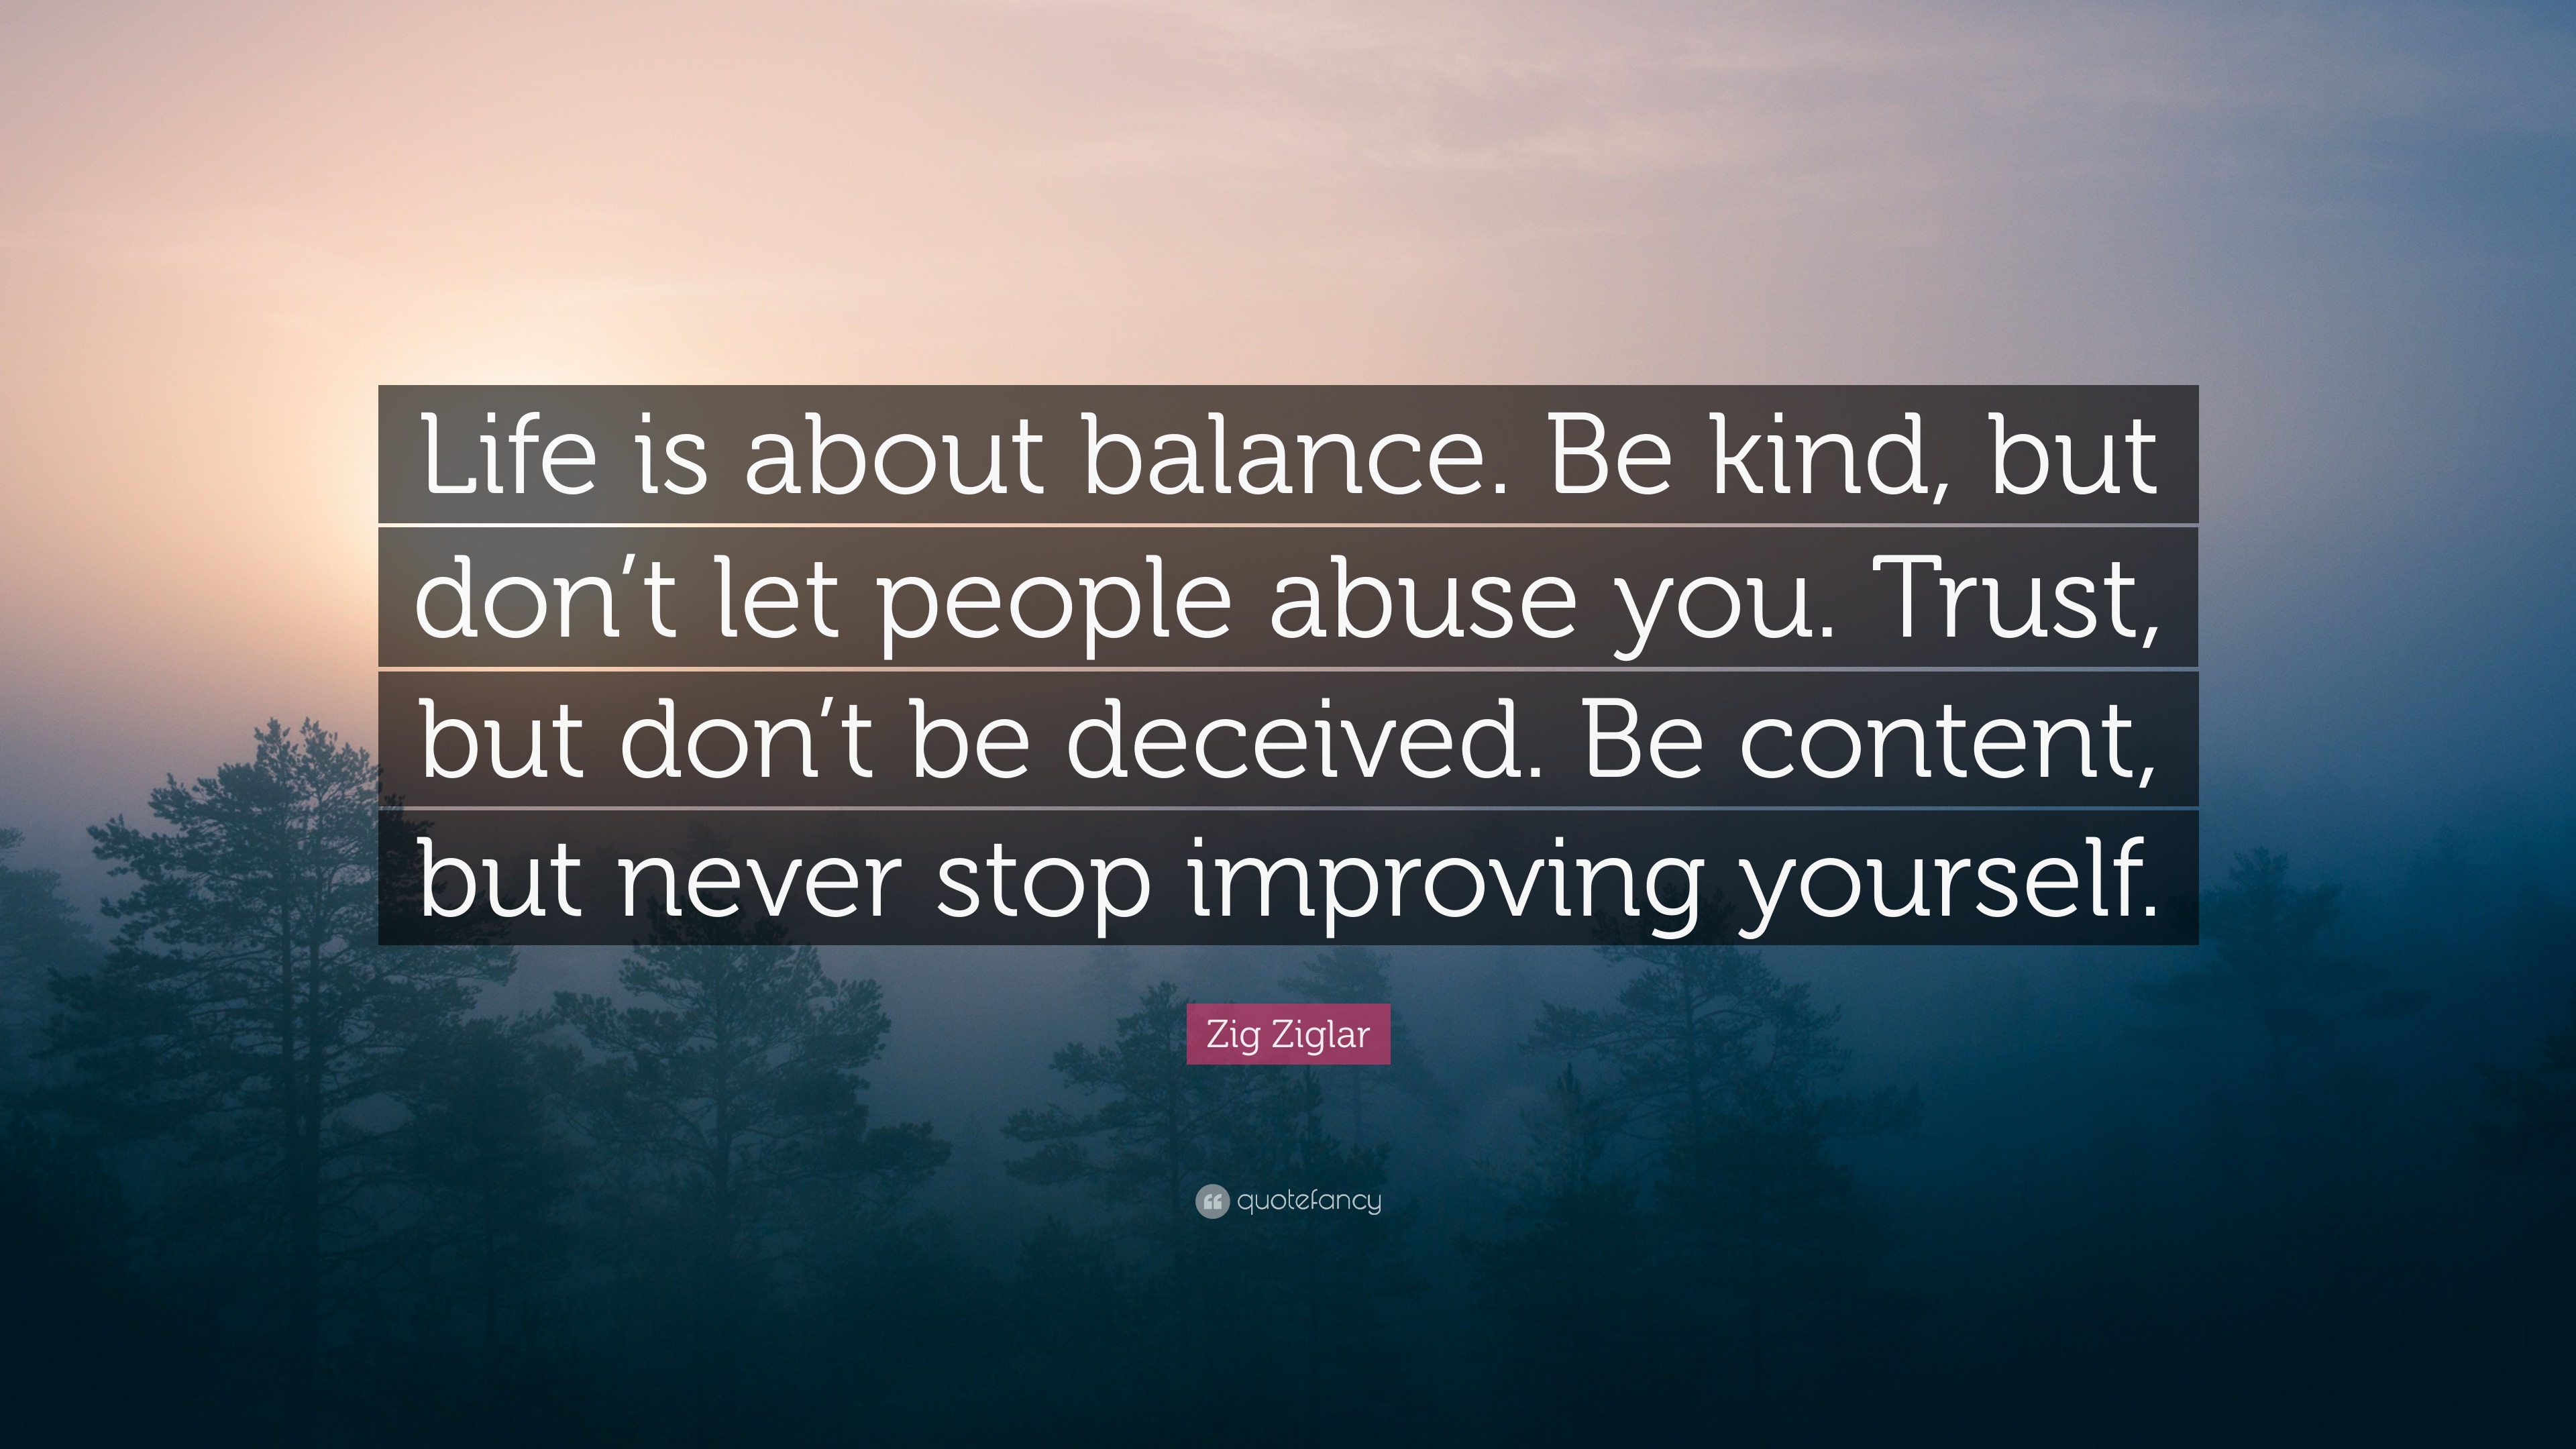 Zig Ziglar Quote: “Life is about balance. Be kind, but don’t let people